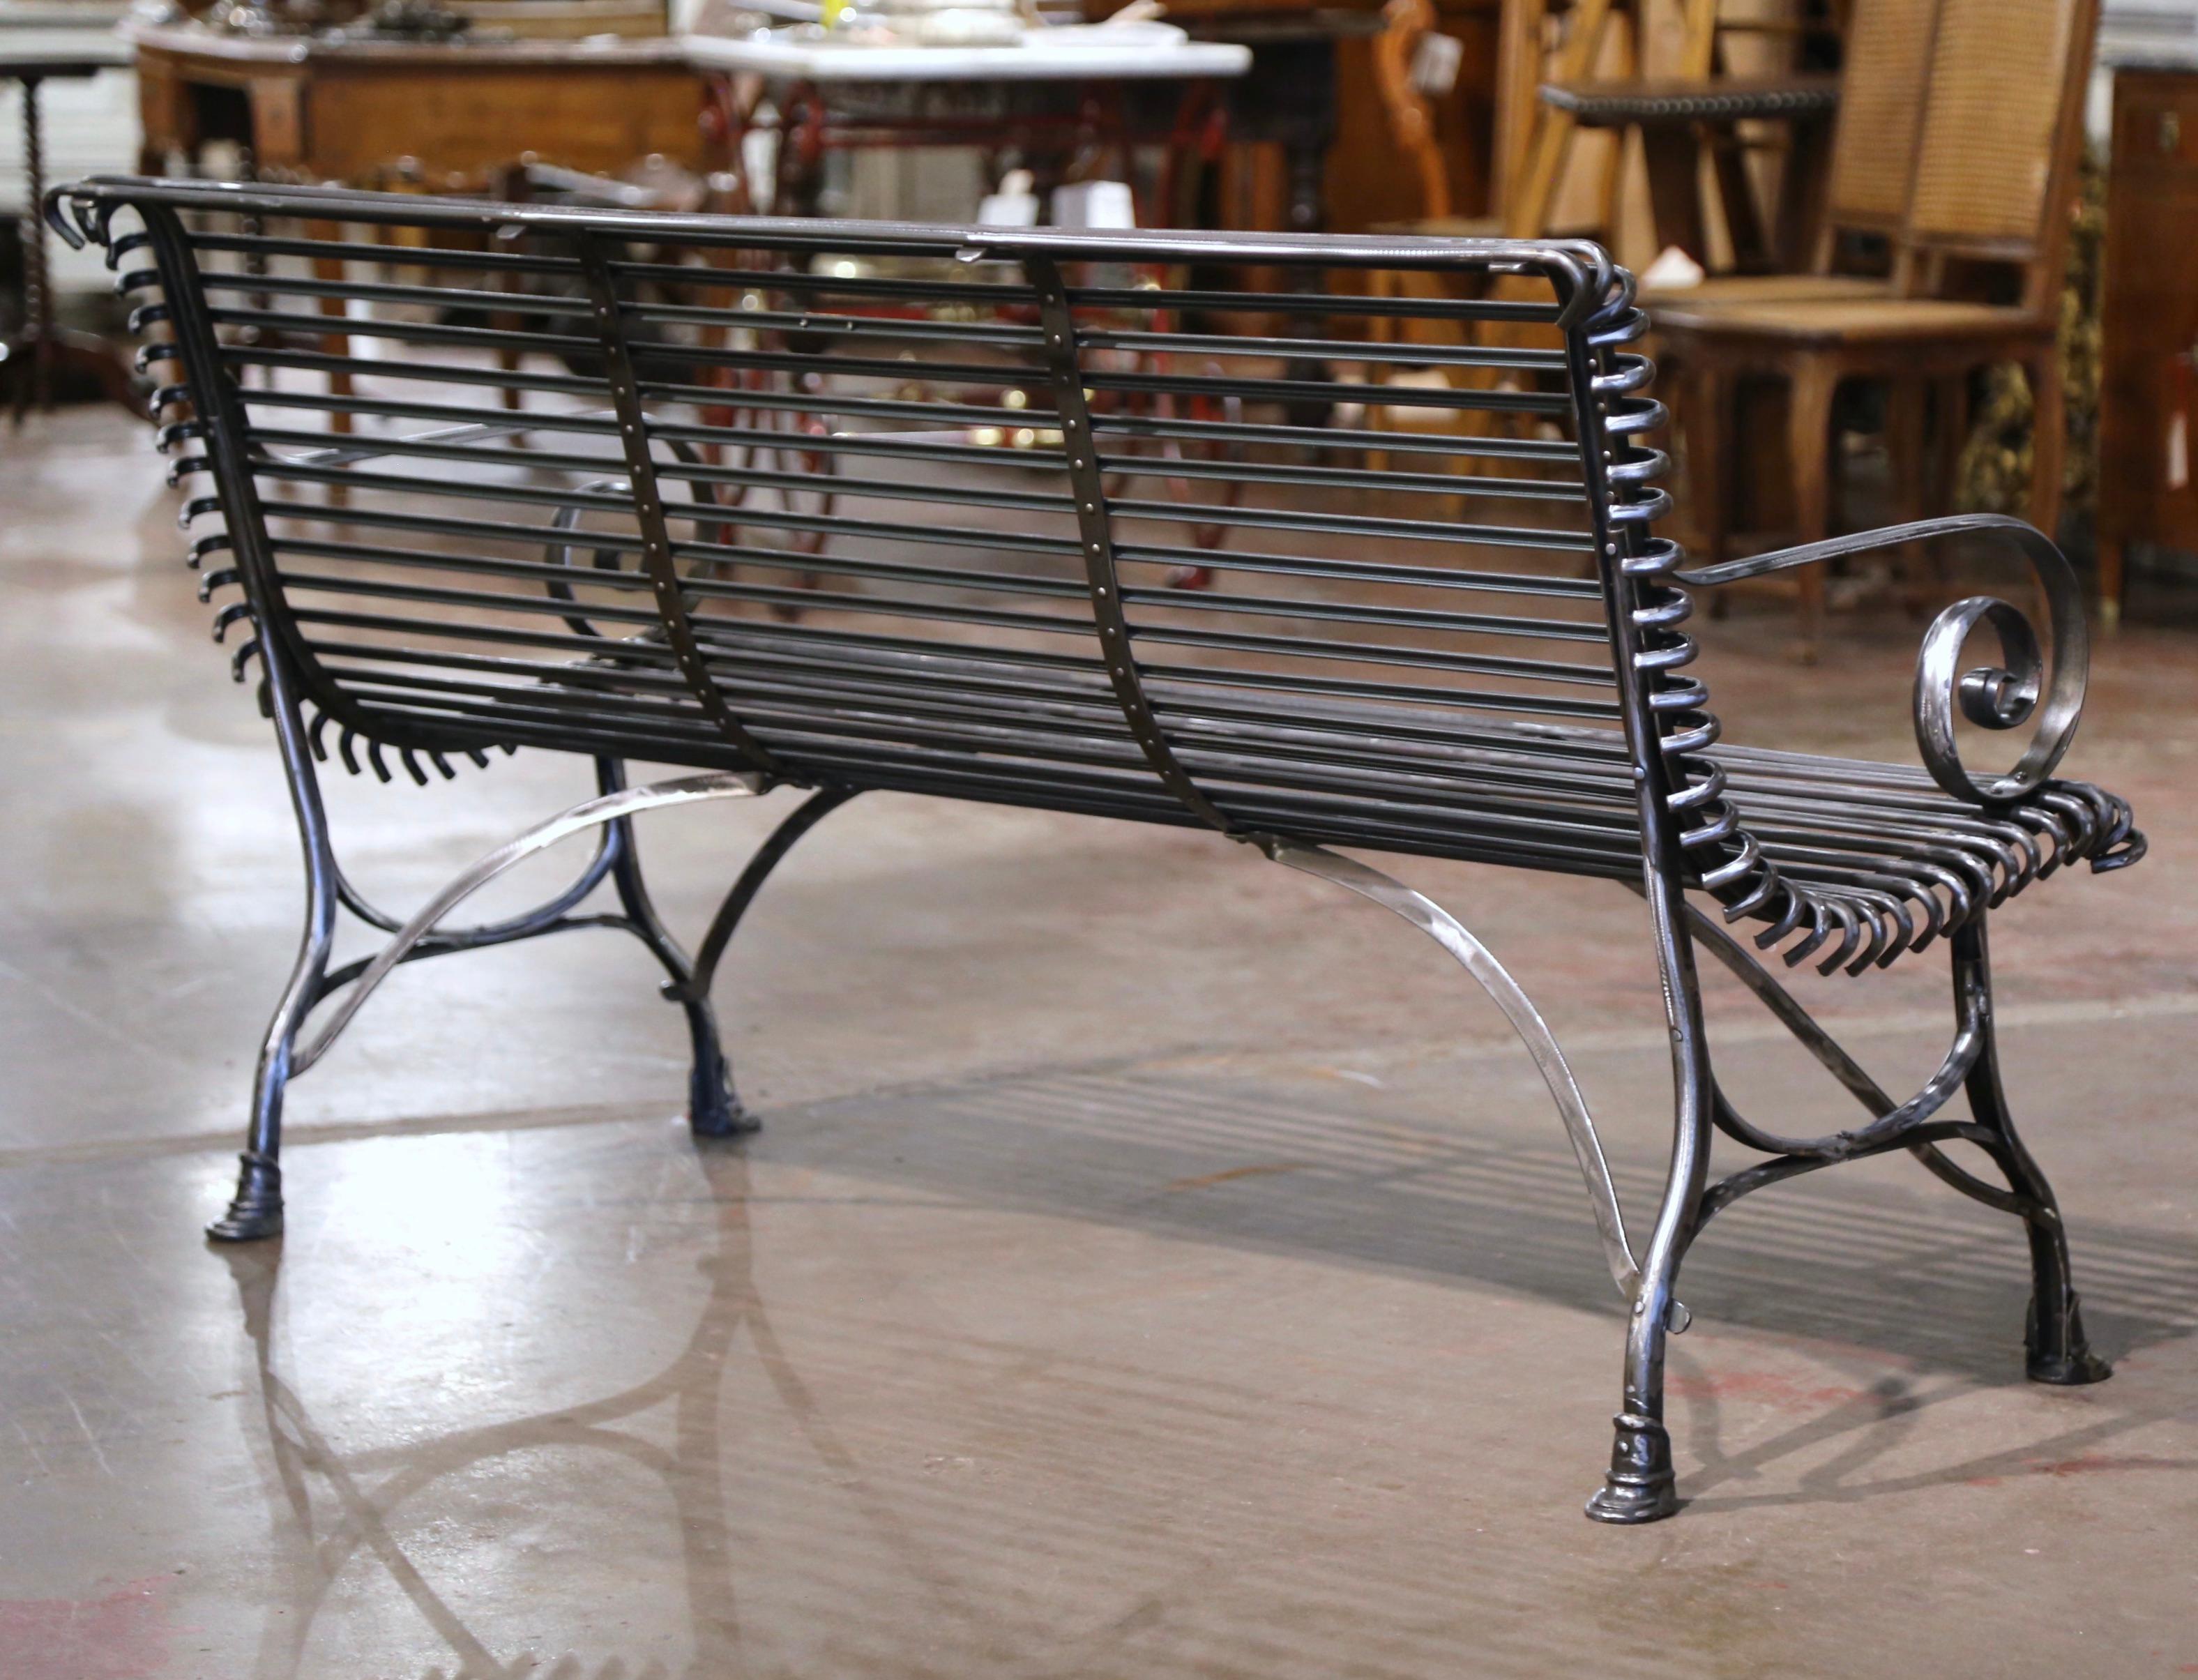 French Polished Iron Three-Seat Bench with Scrolled Arms Signed Sauveur Arras For Sale 3